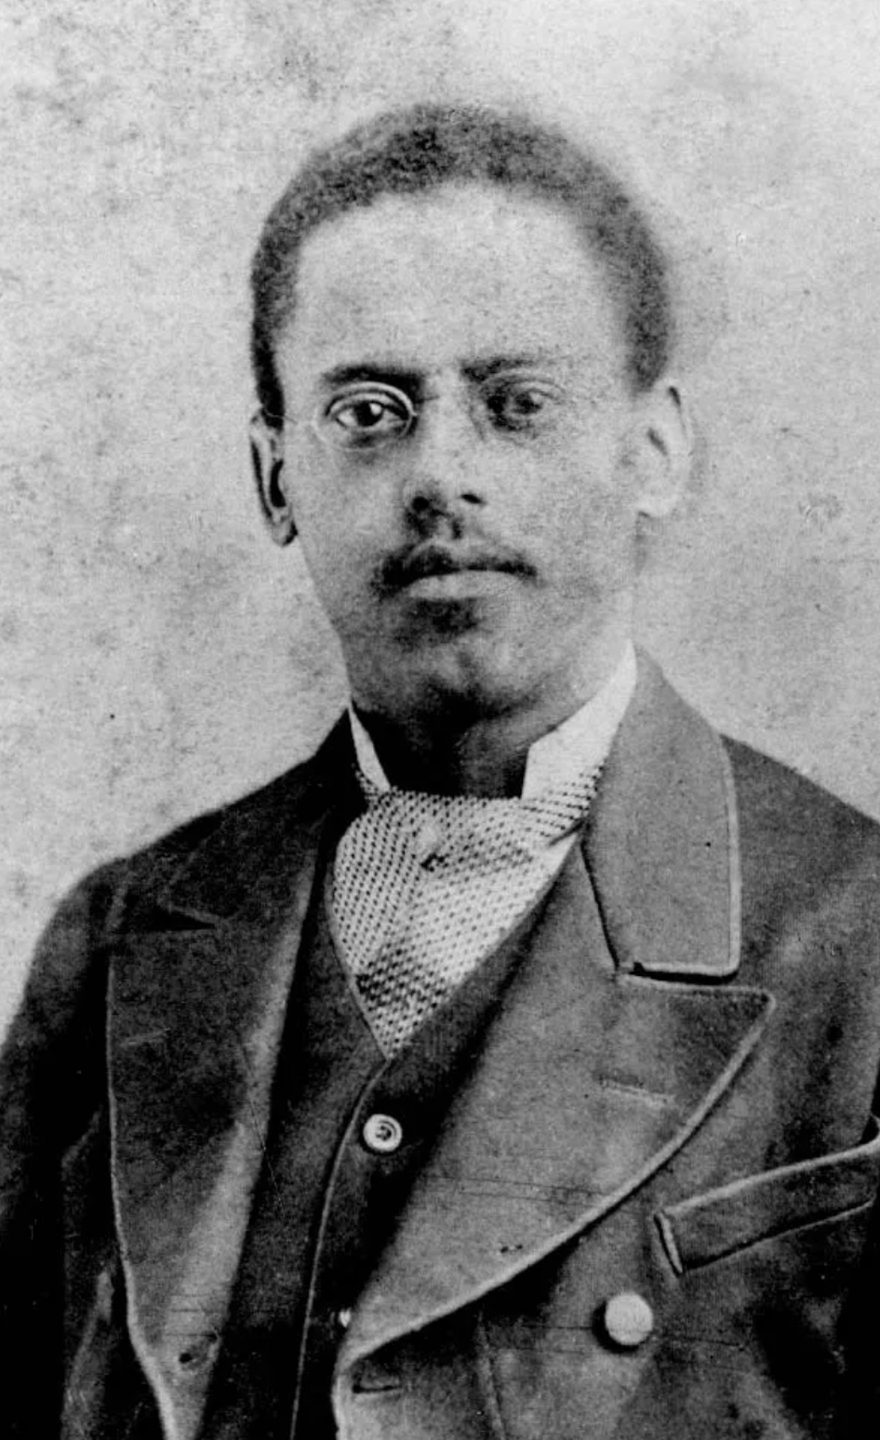 lewis howard latimer stares at the camera in a black and white photo, he wears a suit with a patterned tie and wire framed glasses